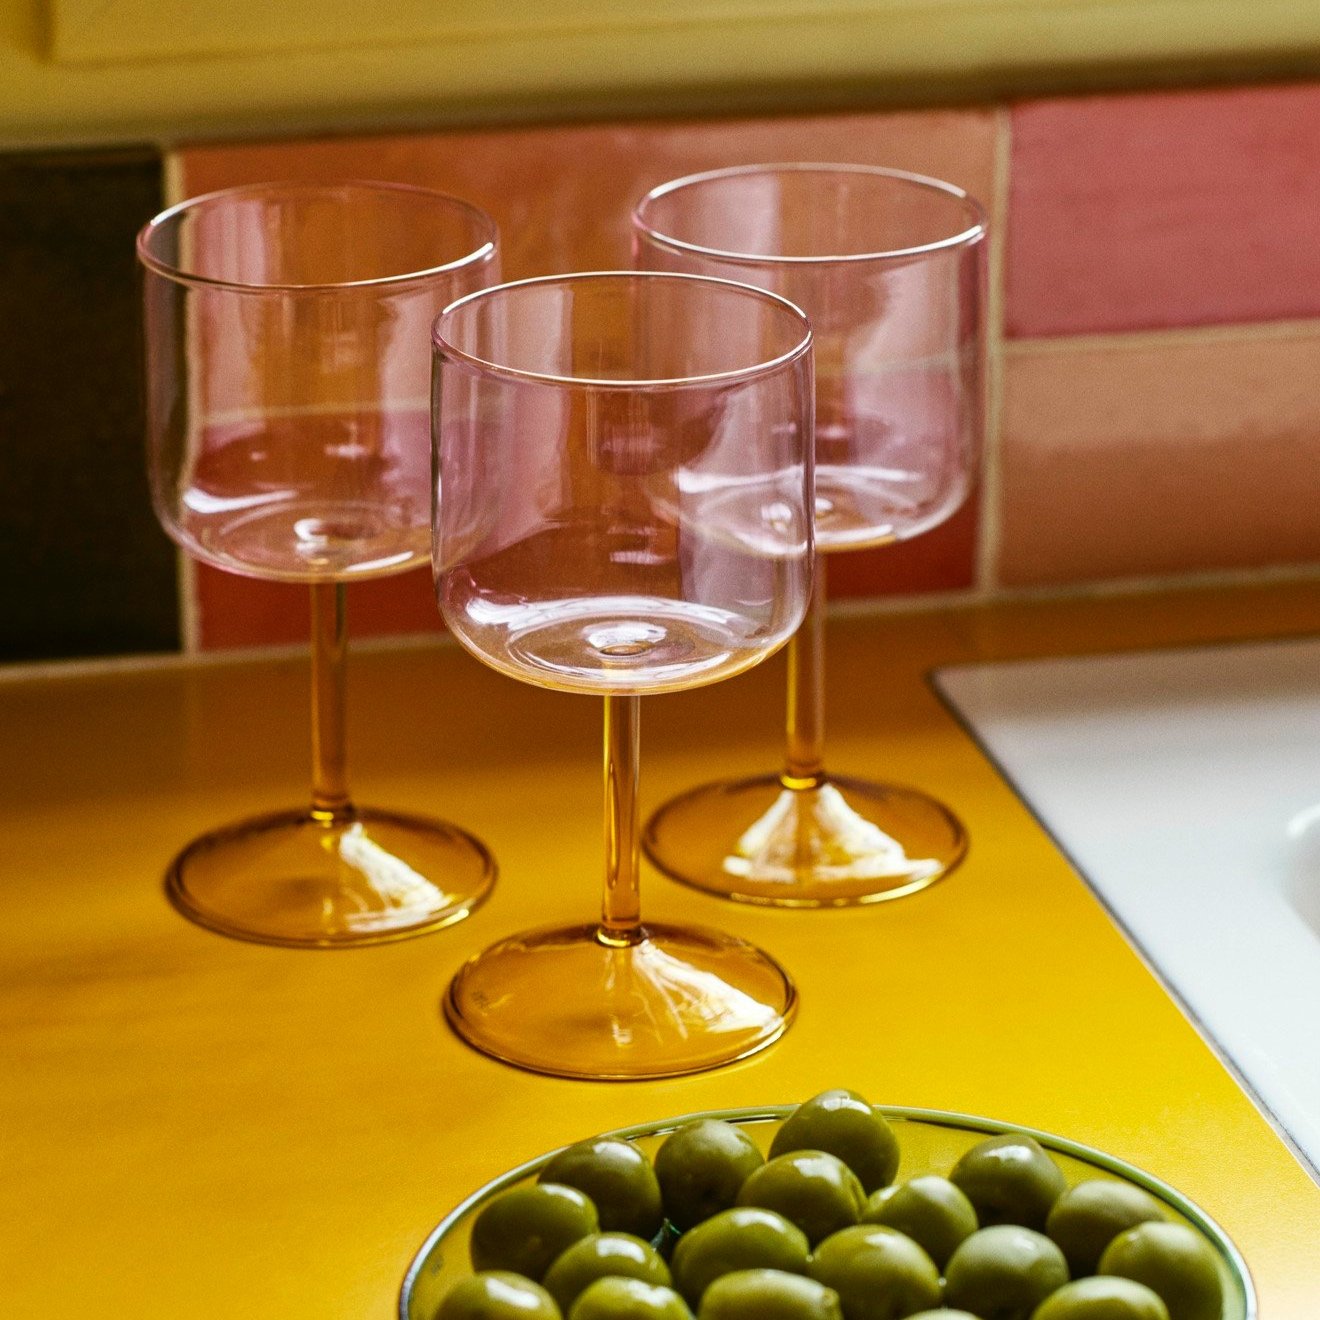 Tint+Wine+Glass+Set+of+2+pind+and+yellow_2-in-1+Serving+Set+light+blue+and+aqua.jpg